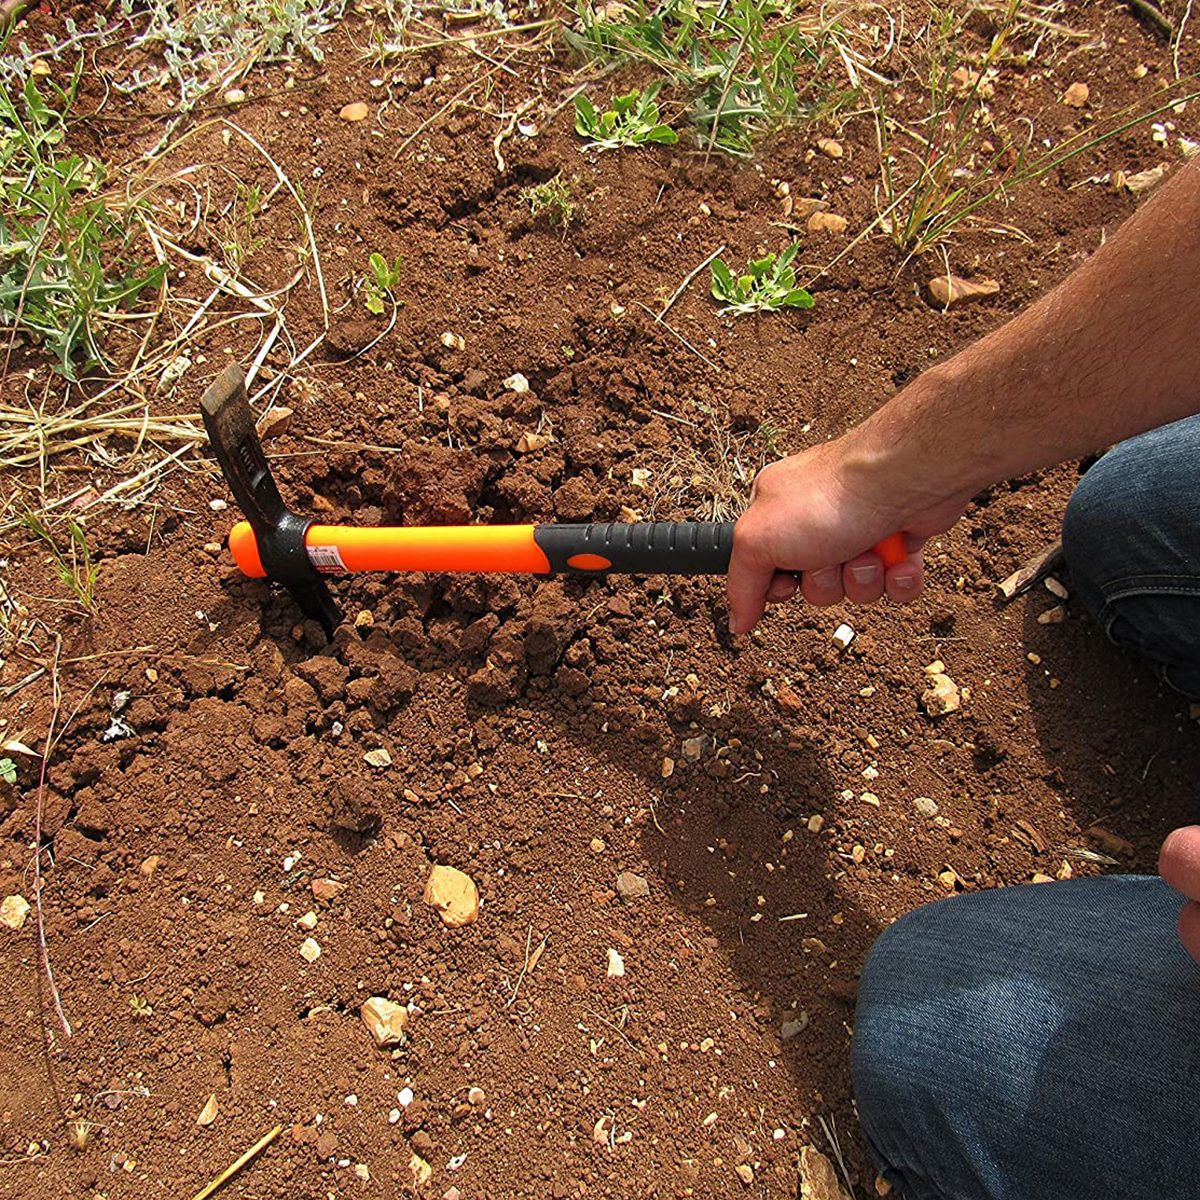 7 Best-Reviewed Garden Hand Tools You Can Get on Amazon